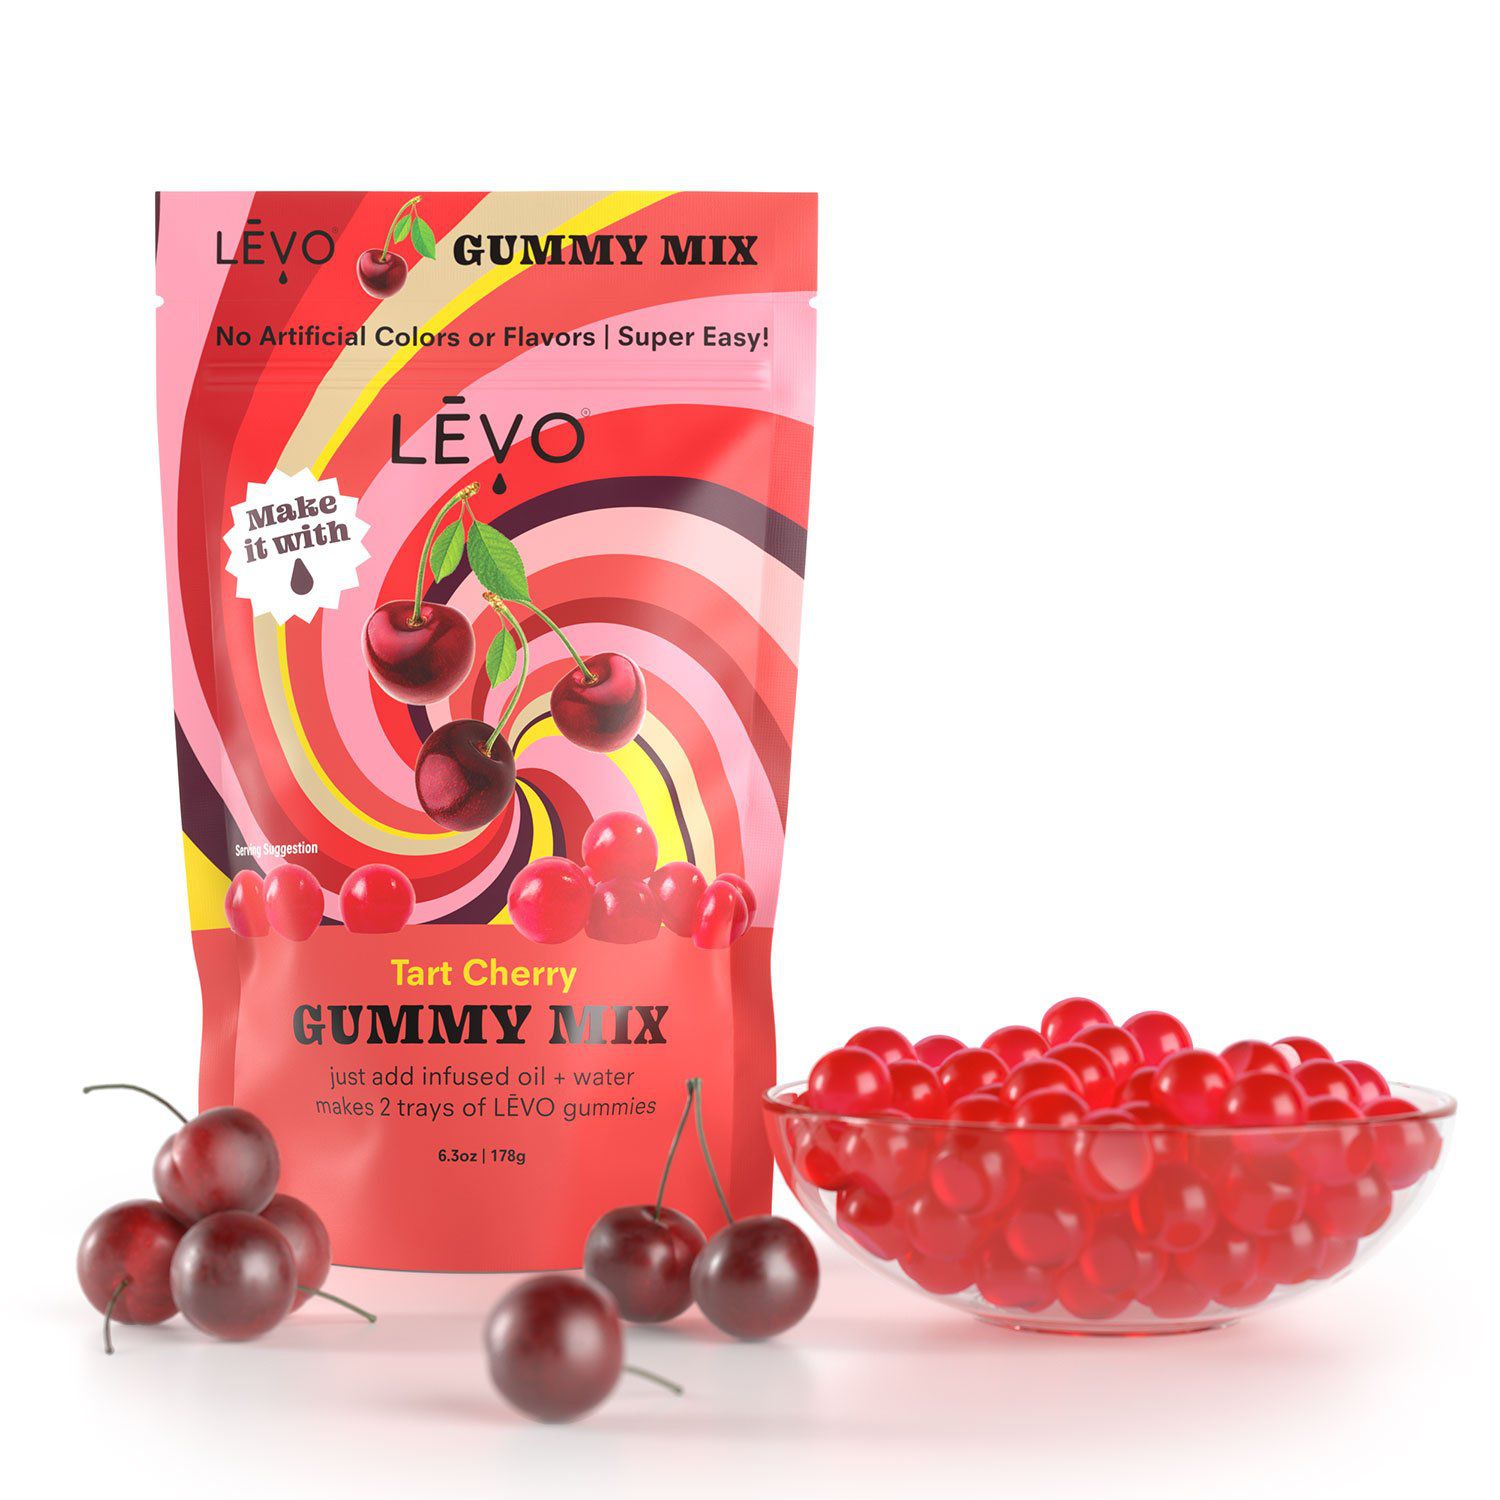 Tart Cherry LEVO gummy mix, made with all natural flavors and no artificial colors. Make your gummies pop with LEVO infused MCT or Coconut Oil. LEVOoil.com has everything you need to make your own infused gummies at home. Share your infused gummies with friends.